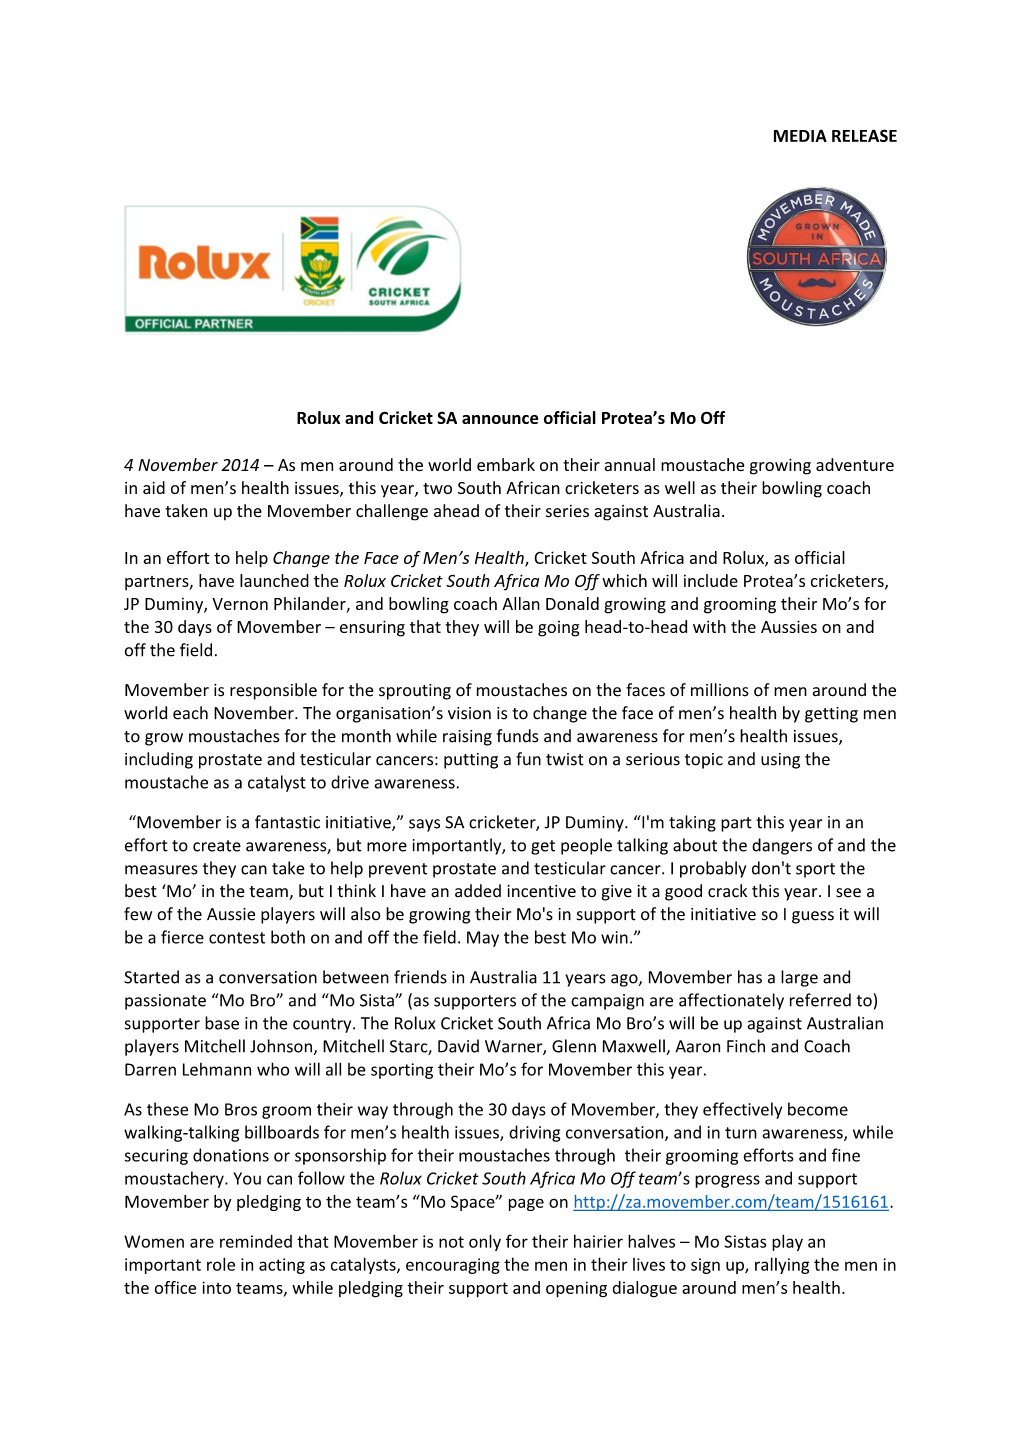 MEDIA RELEASE Rolux and Cricket SA Announce Official